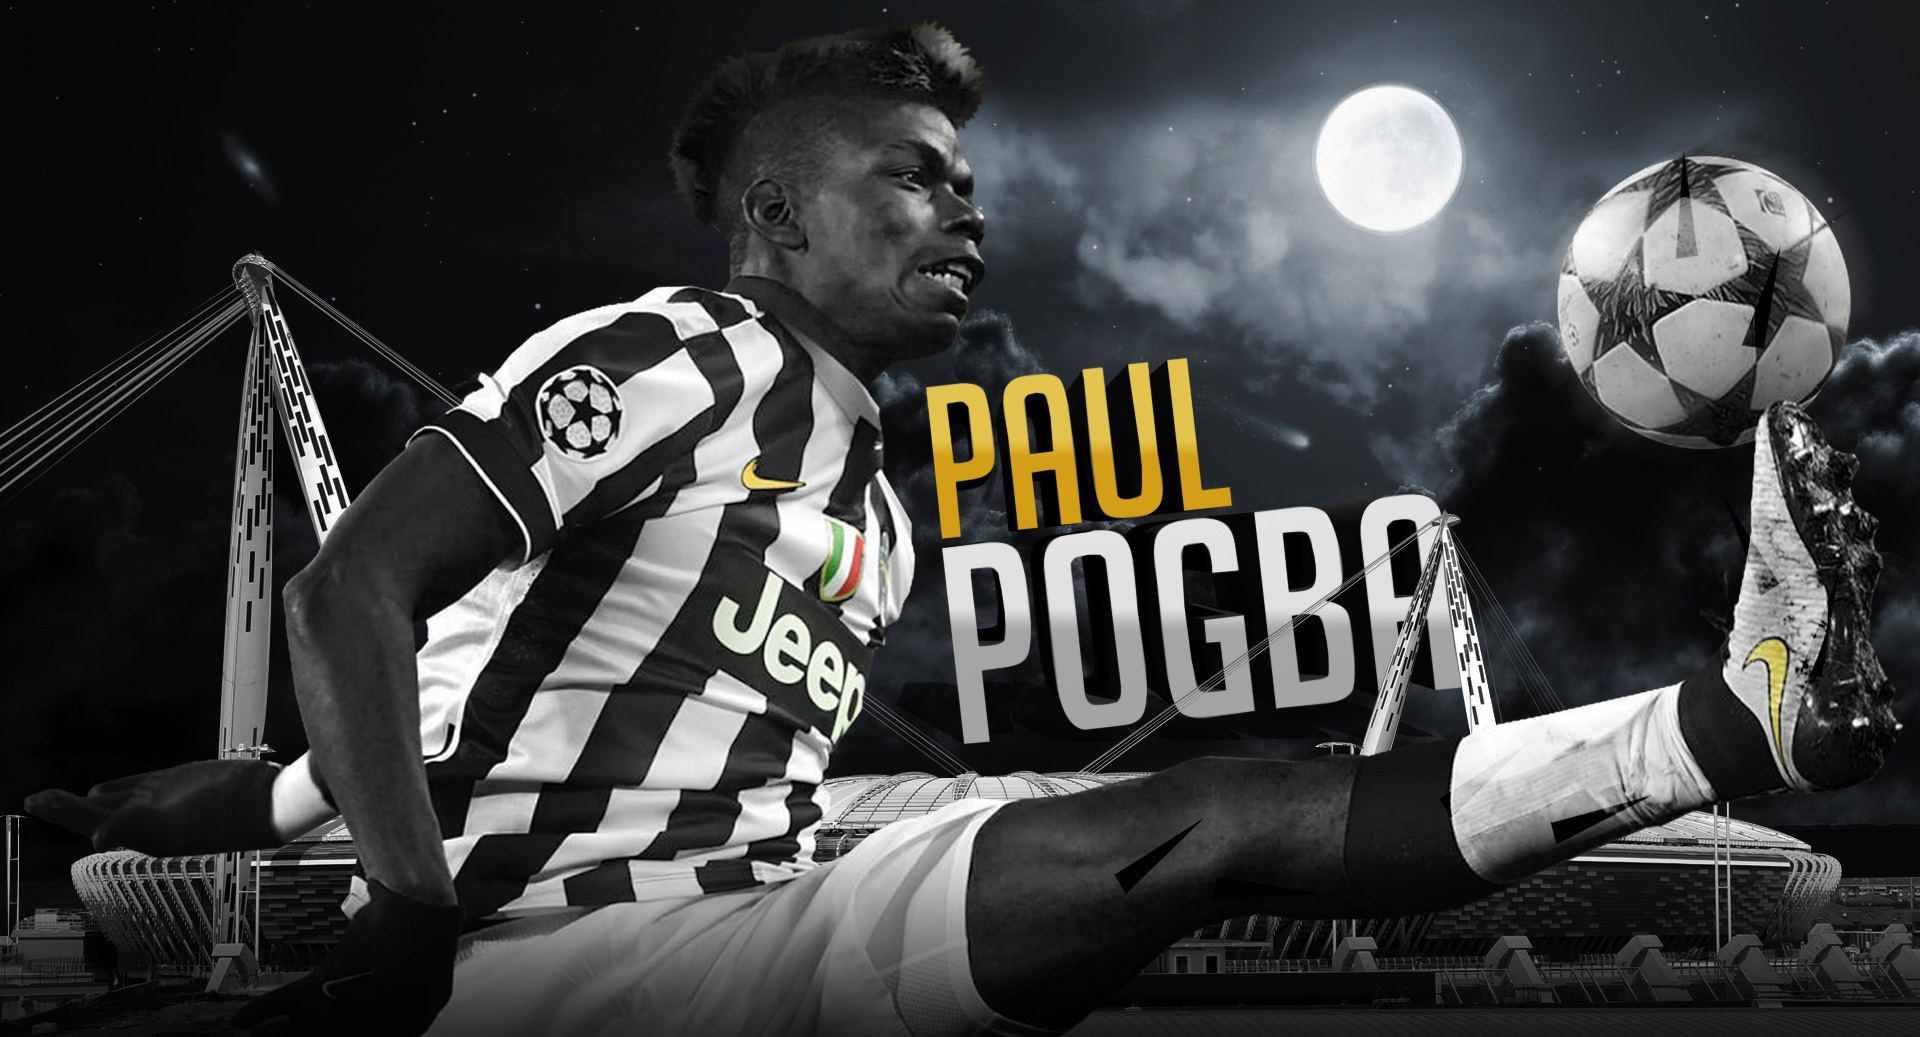 paul pogba iphone wallpaper,football player,player,football,competition event,sports equipment